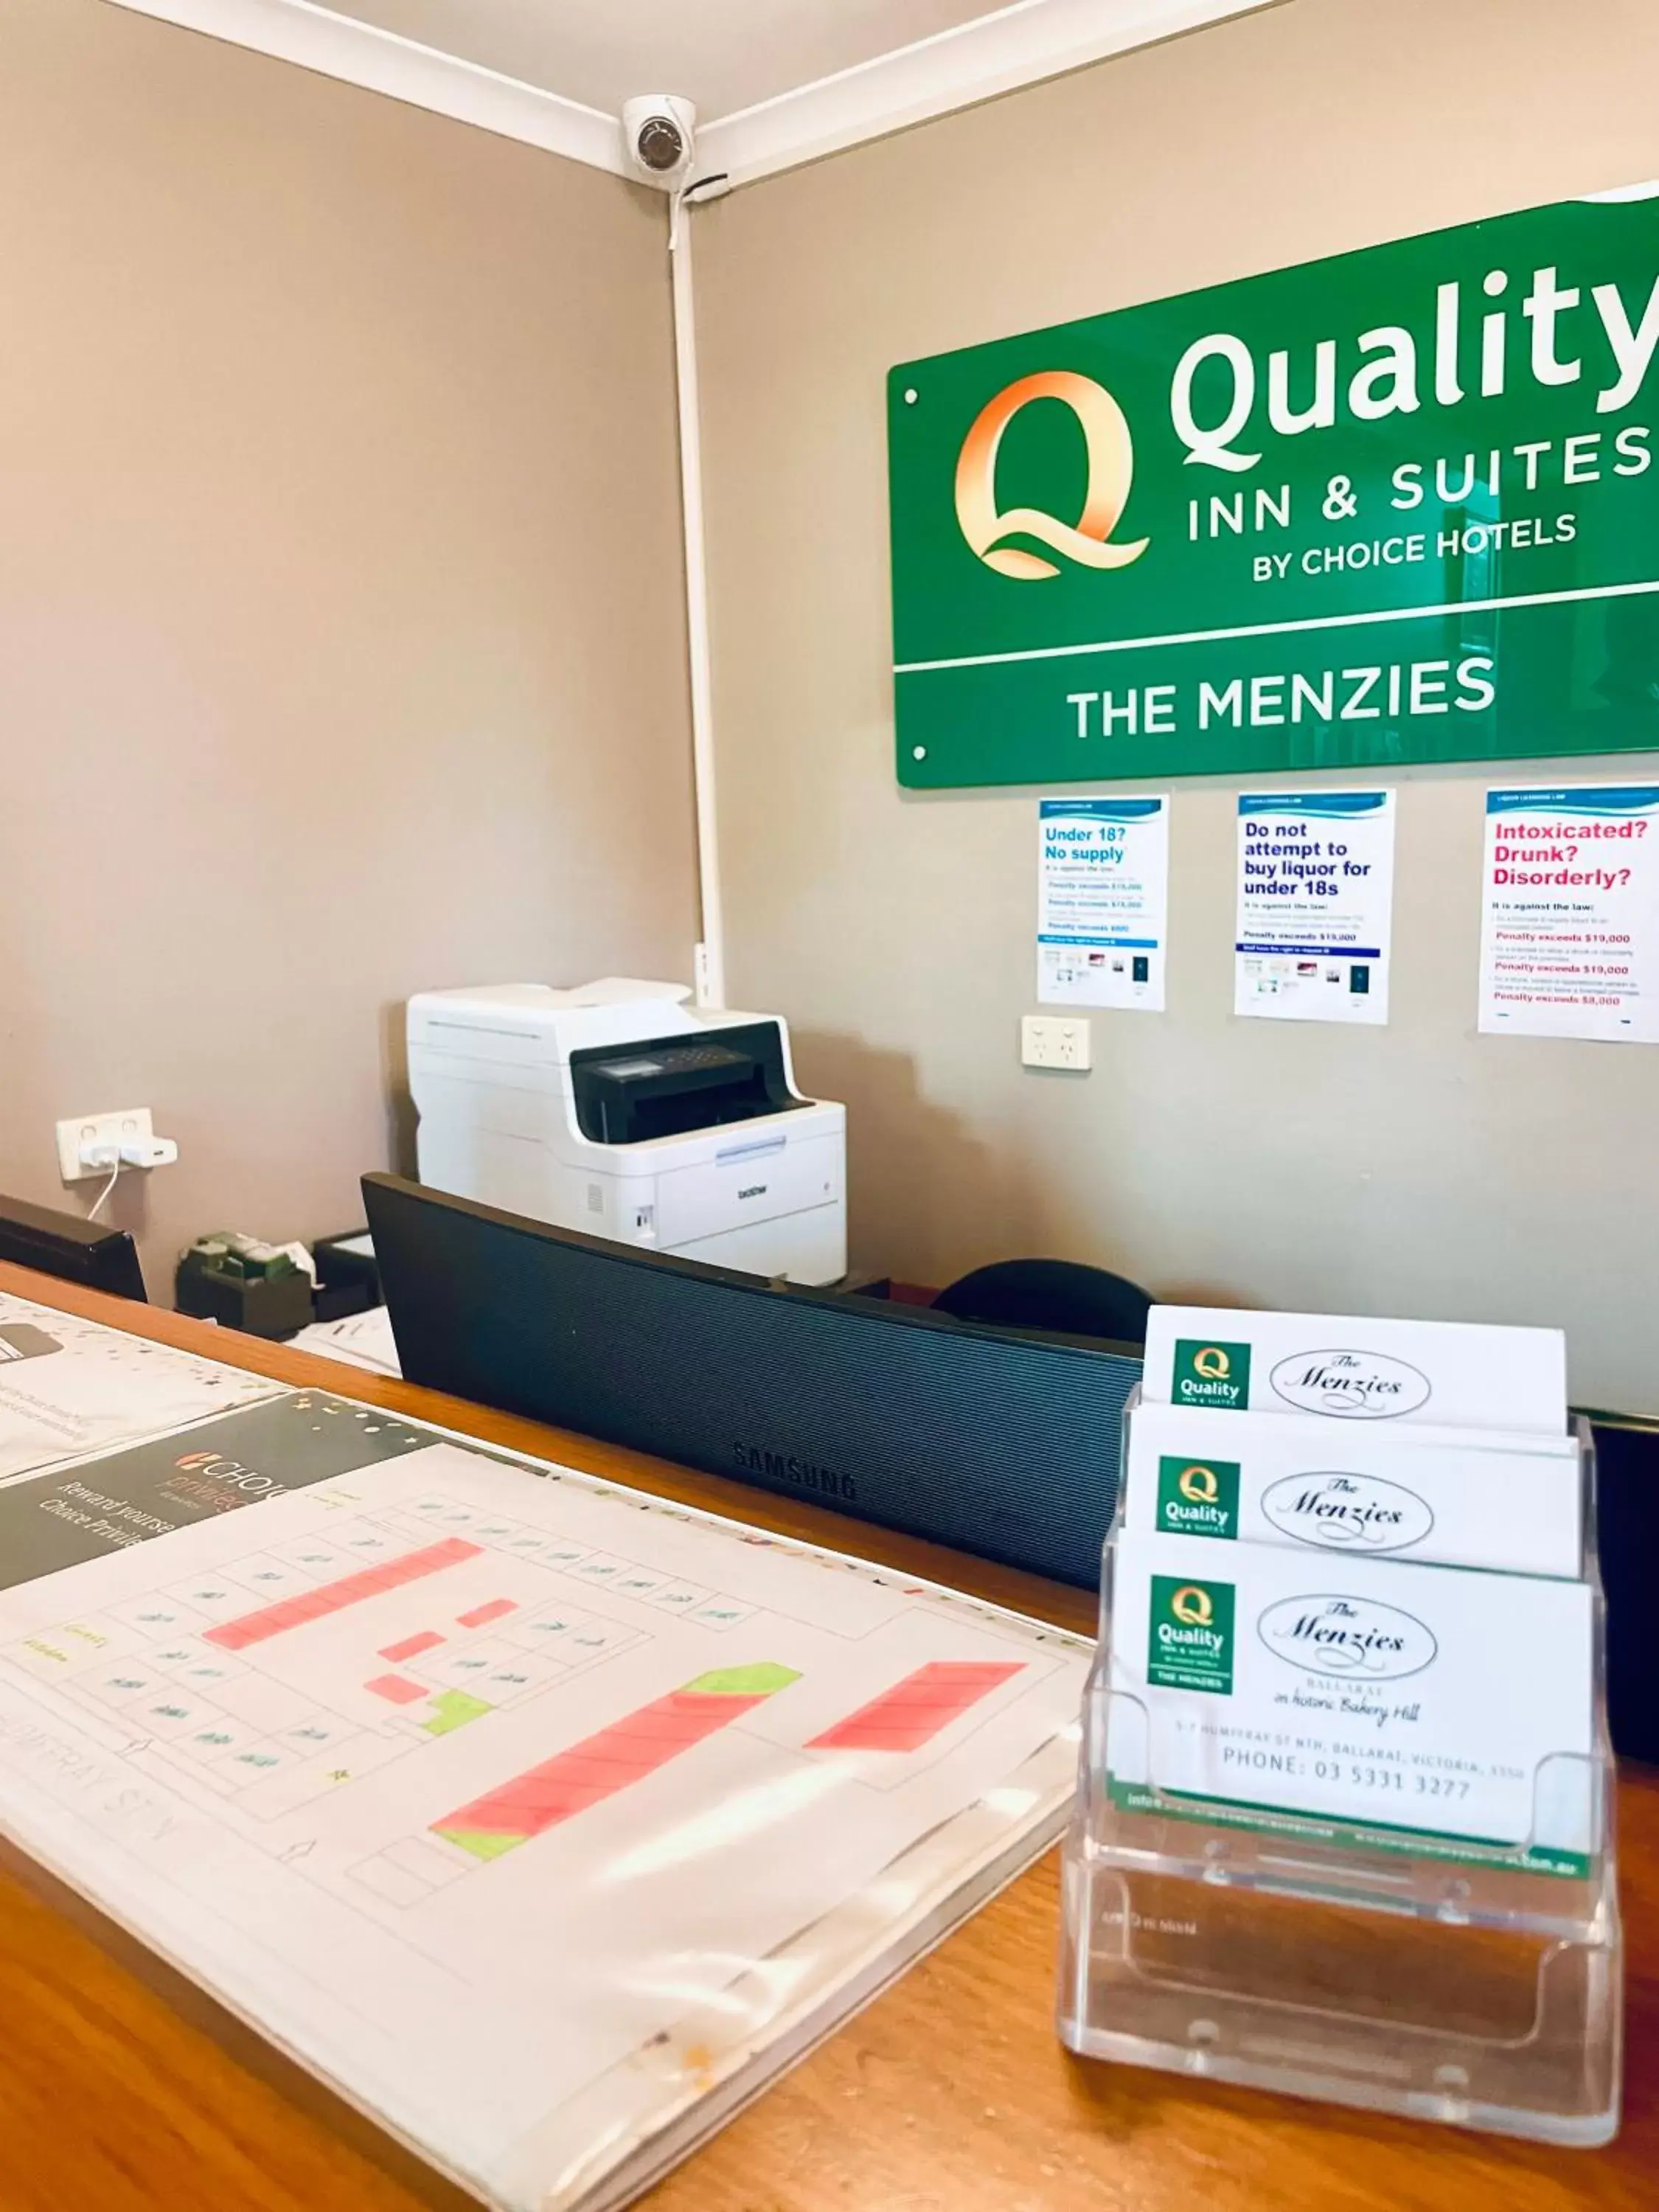 Quality Inn & Suites The Menzies